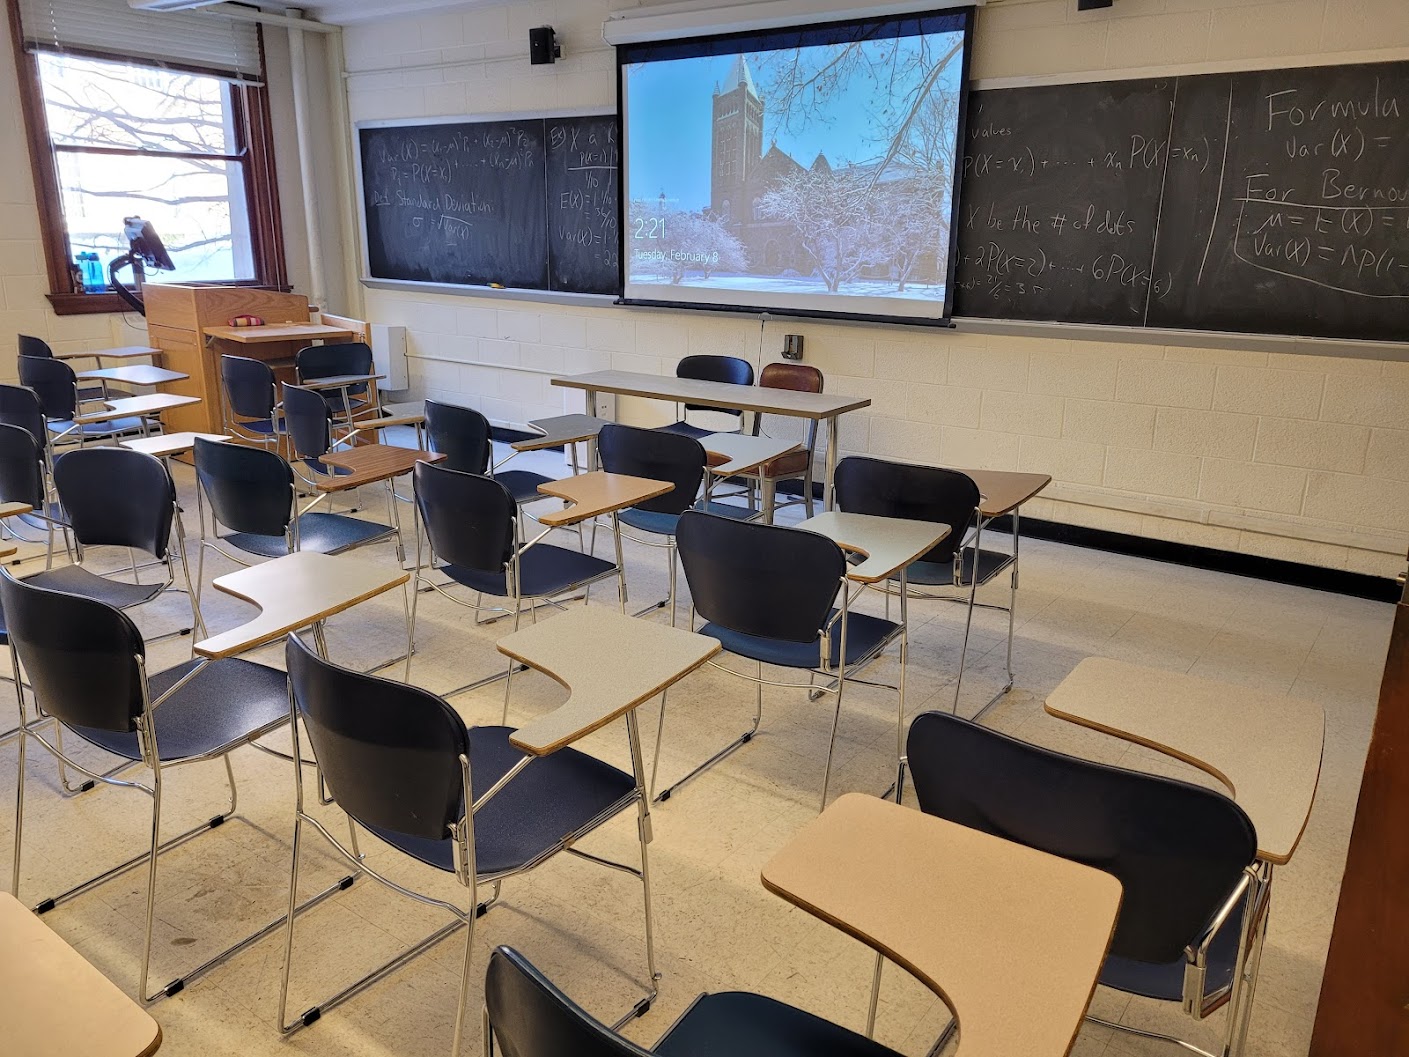 A view of the classroom with movable table arm chairs, chalkboard, and instructor table in front.